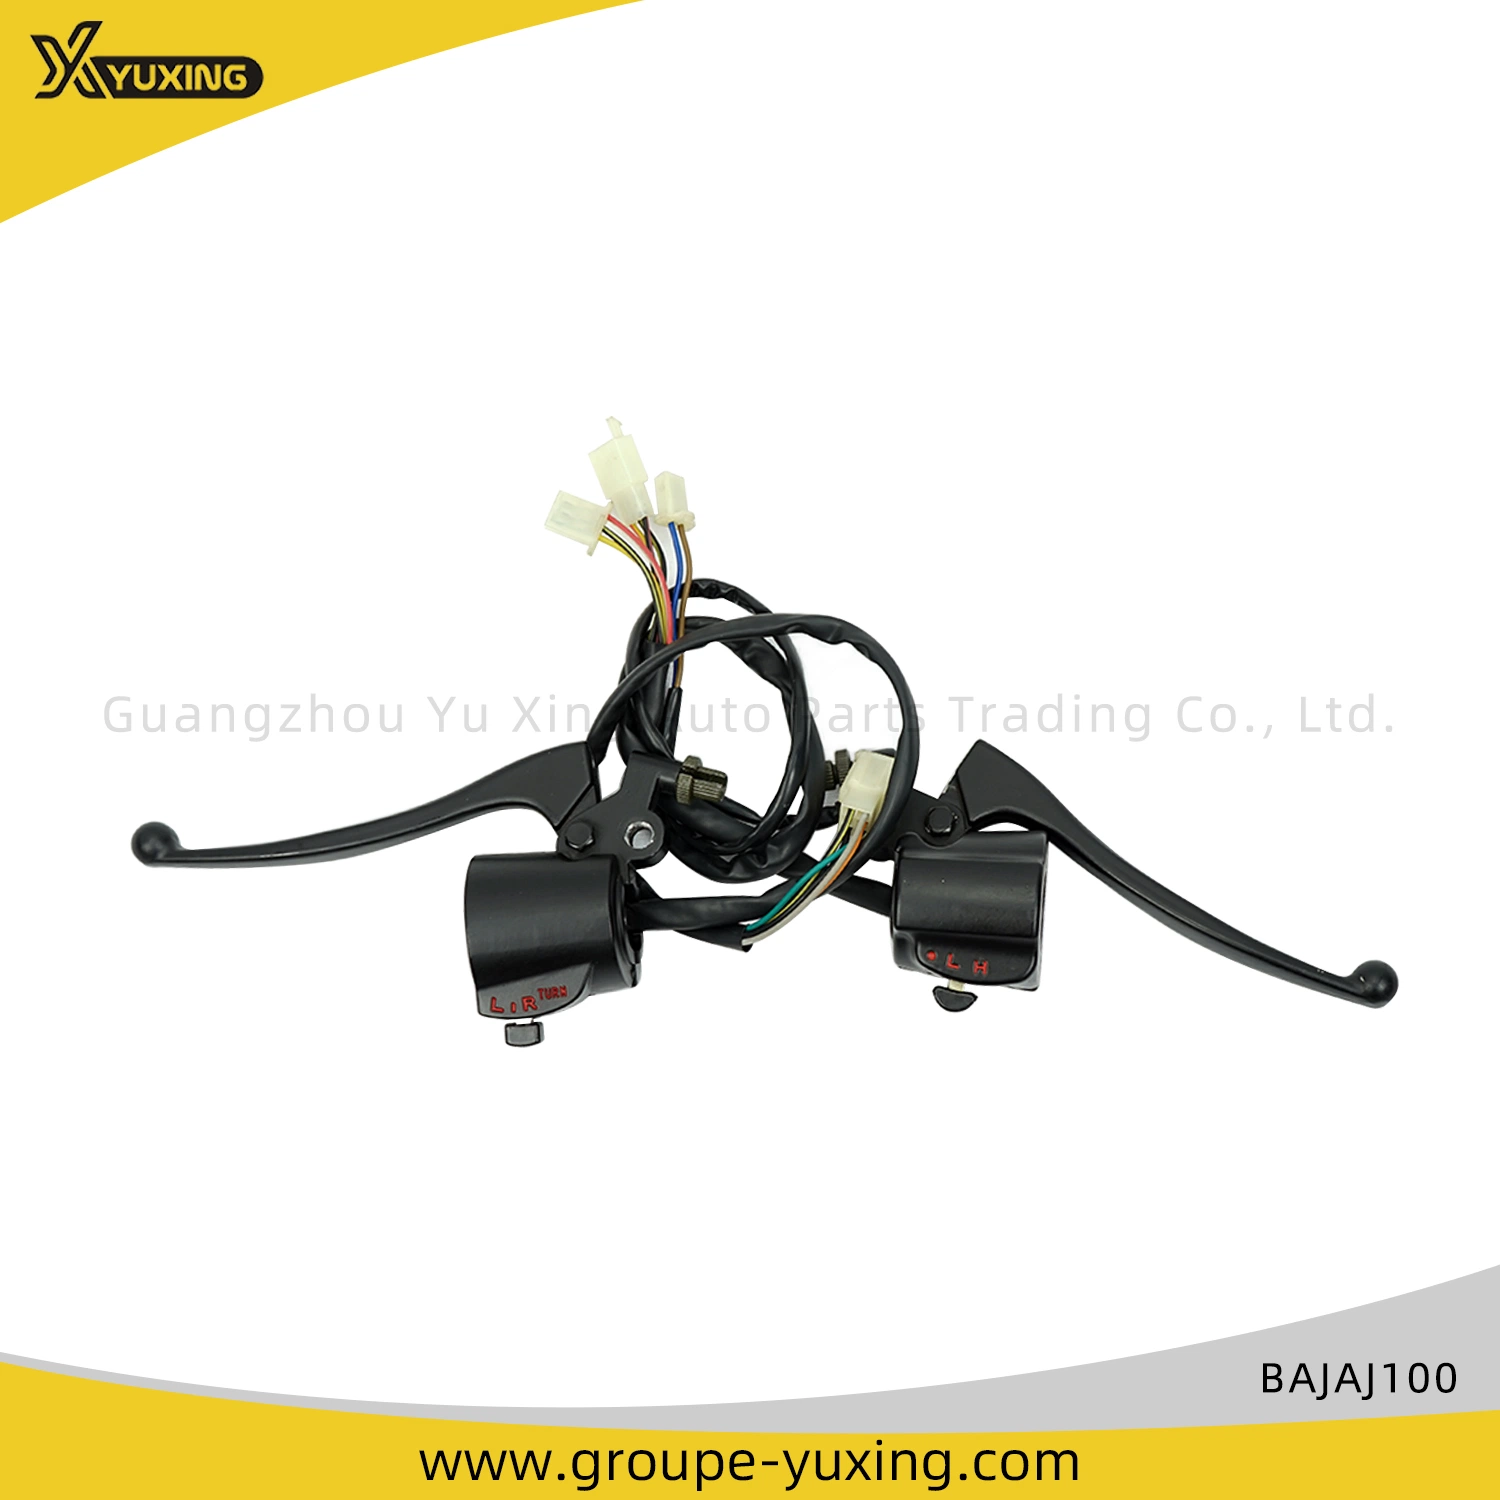 Factory Motorbike/Motorcycle Spare Parts Handle Switch Assembly for Bajaj100